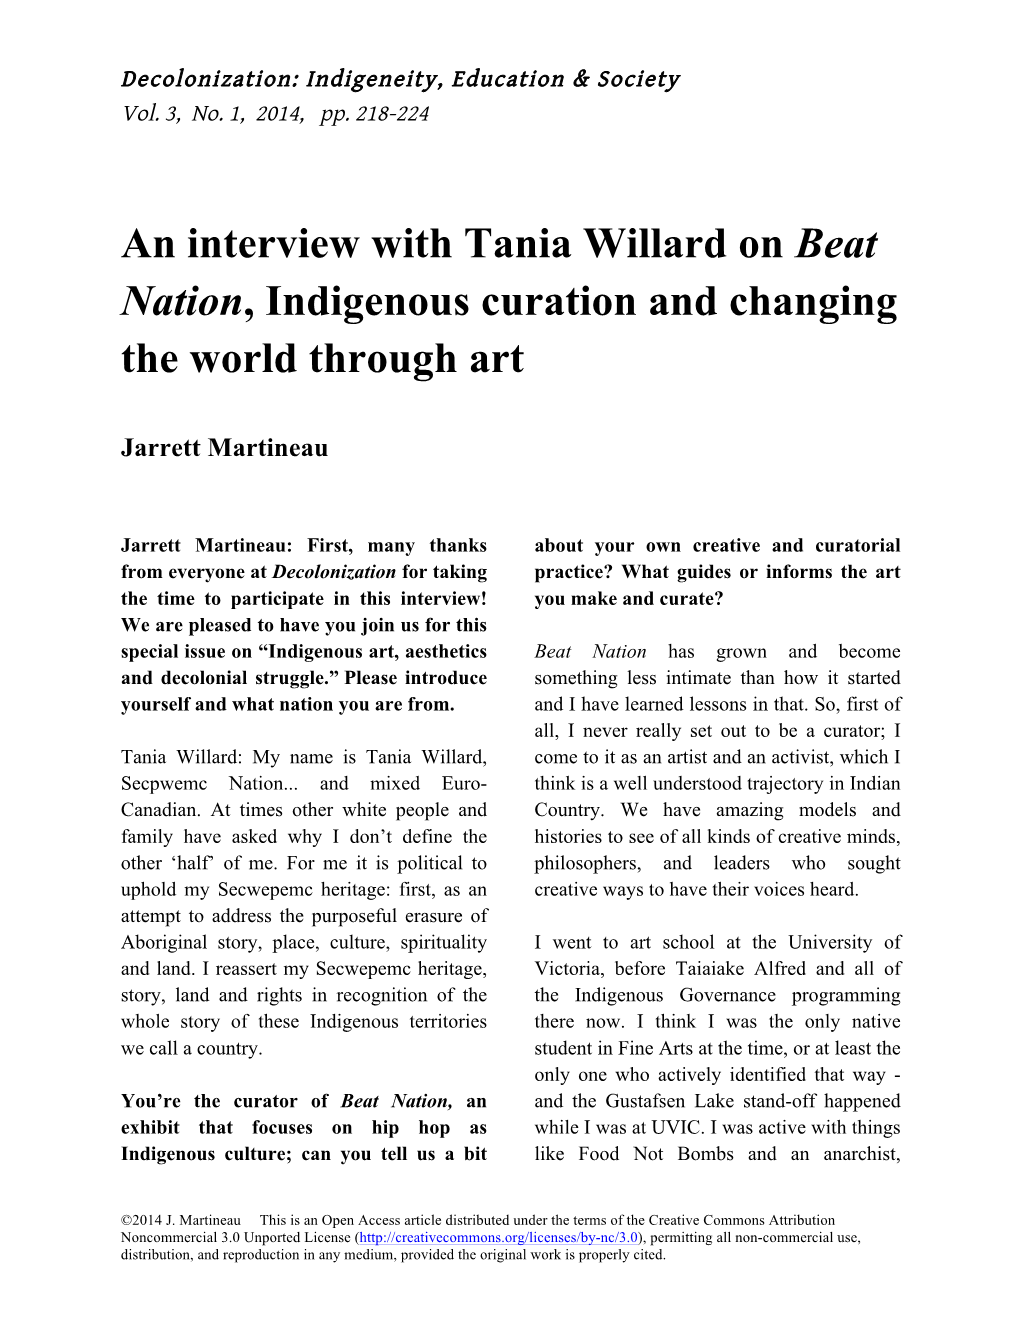 An Interview with Tania Willard on Beat Nation, Indigenous Curation and Changing the World Through Art